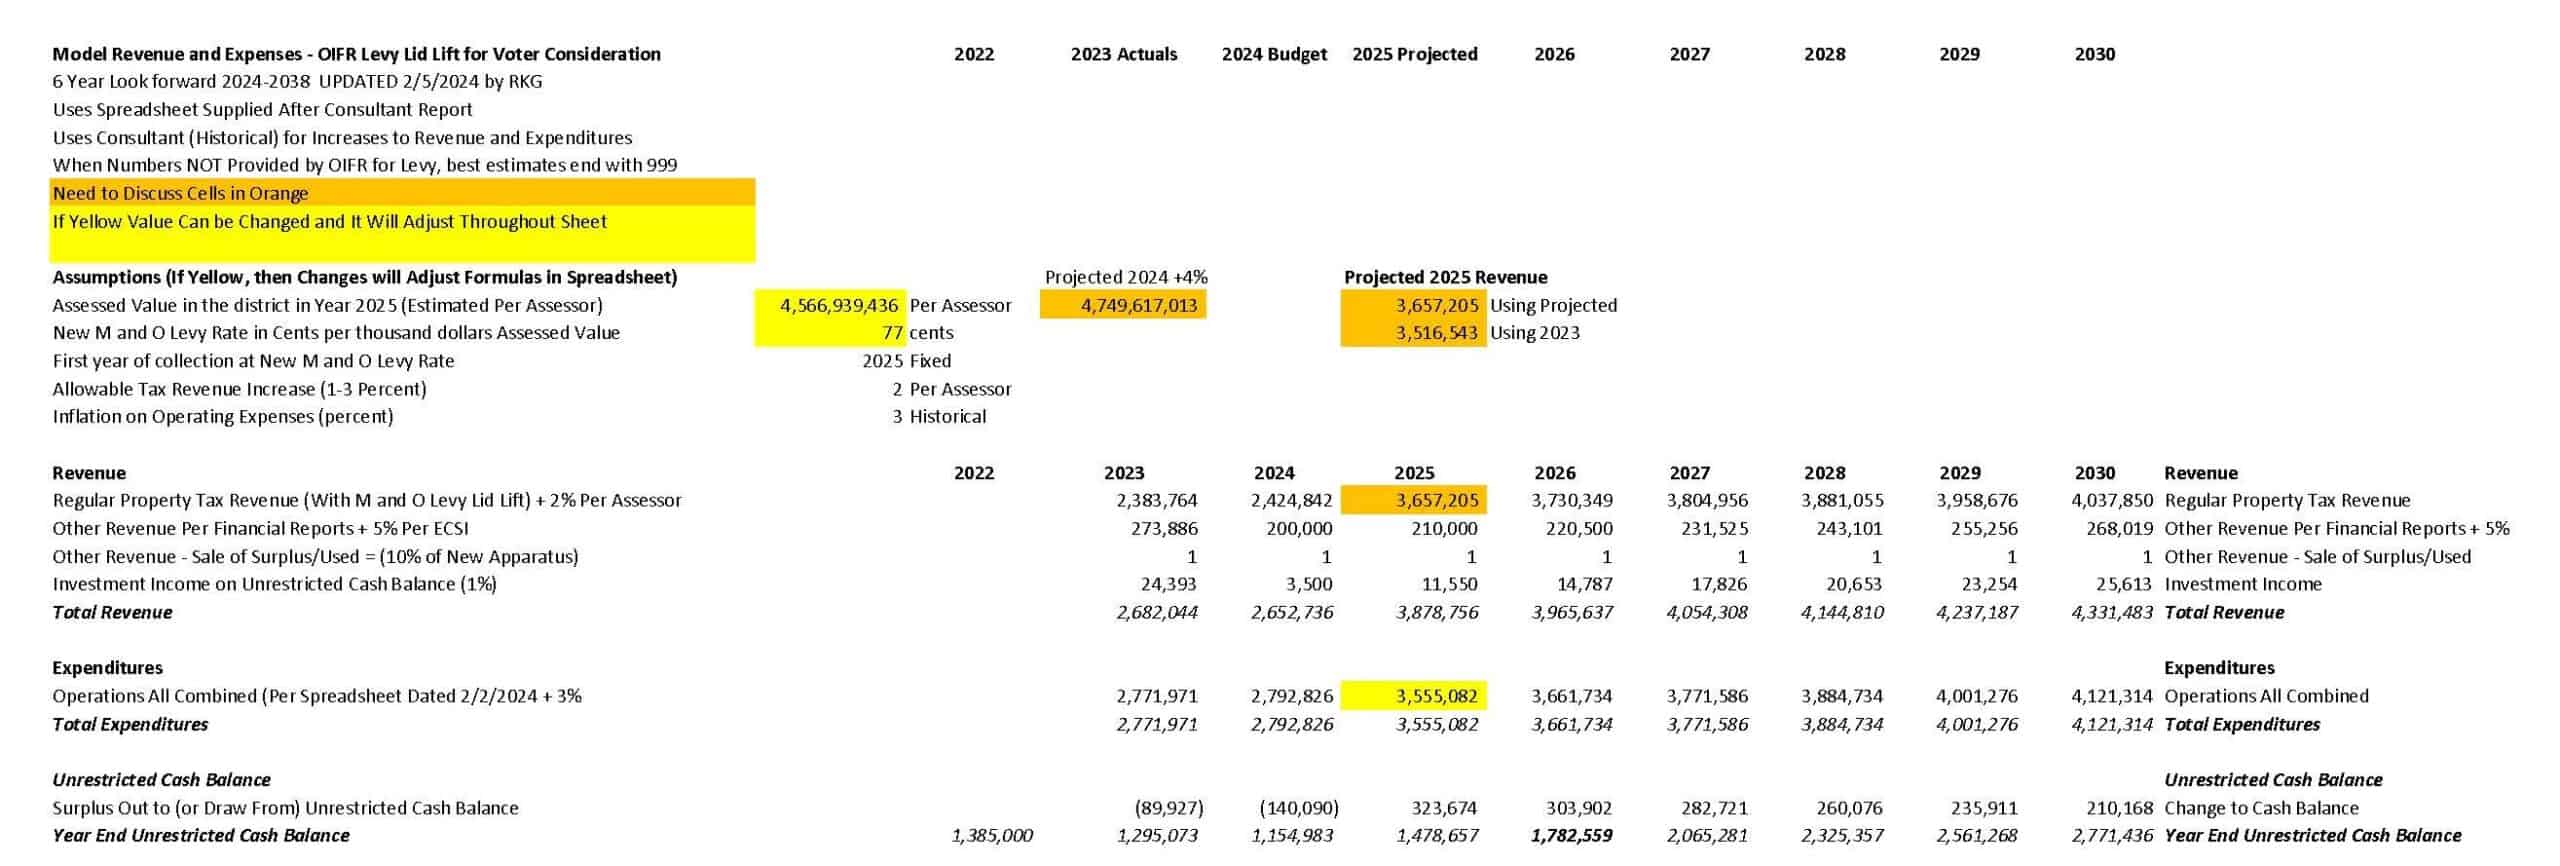 2024-02-05 Updated 2023 Actual and 2025 Projected and 6 Year Projections by Commissioner Gaylord